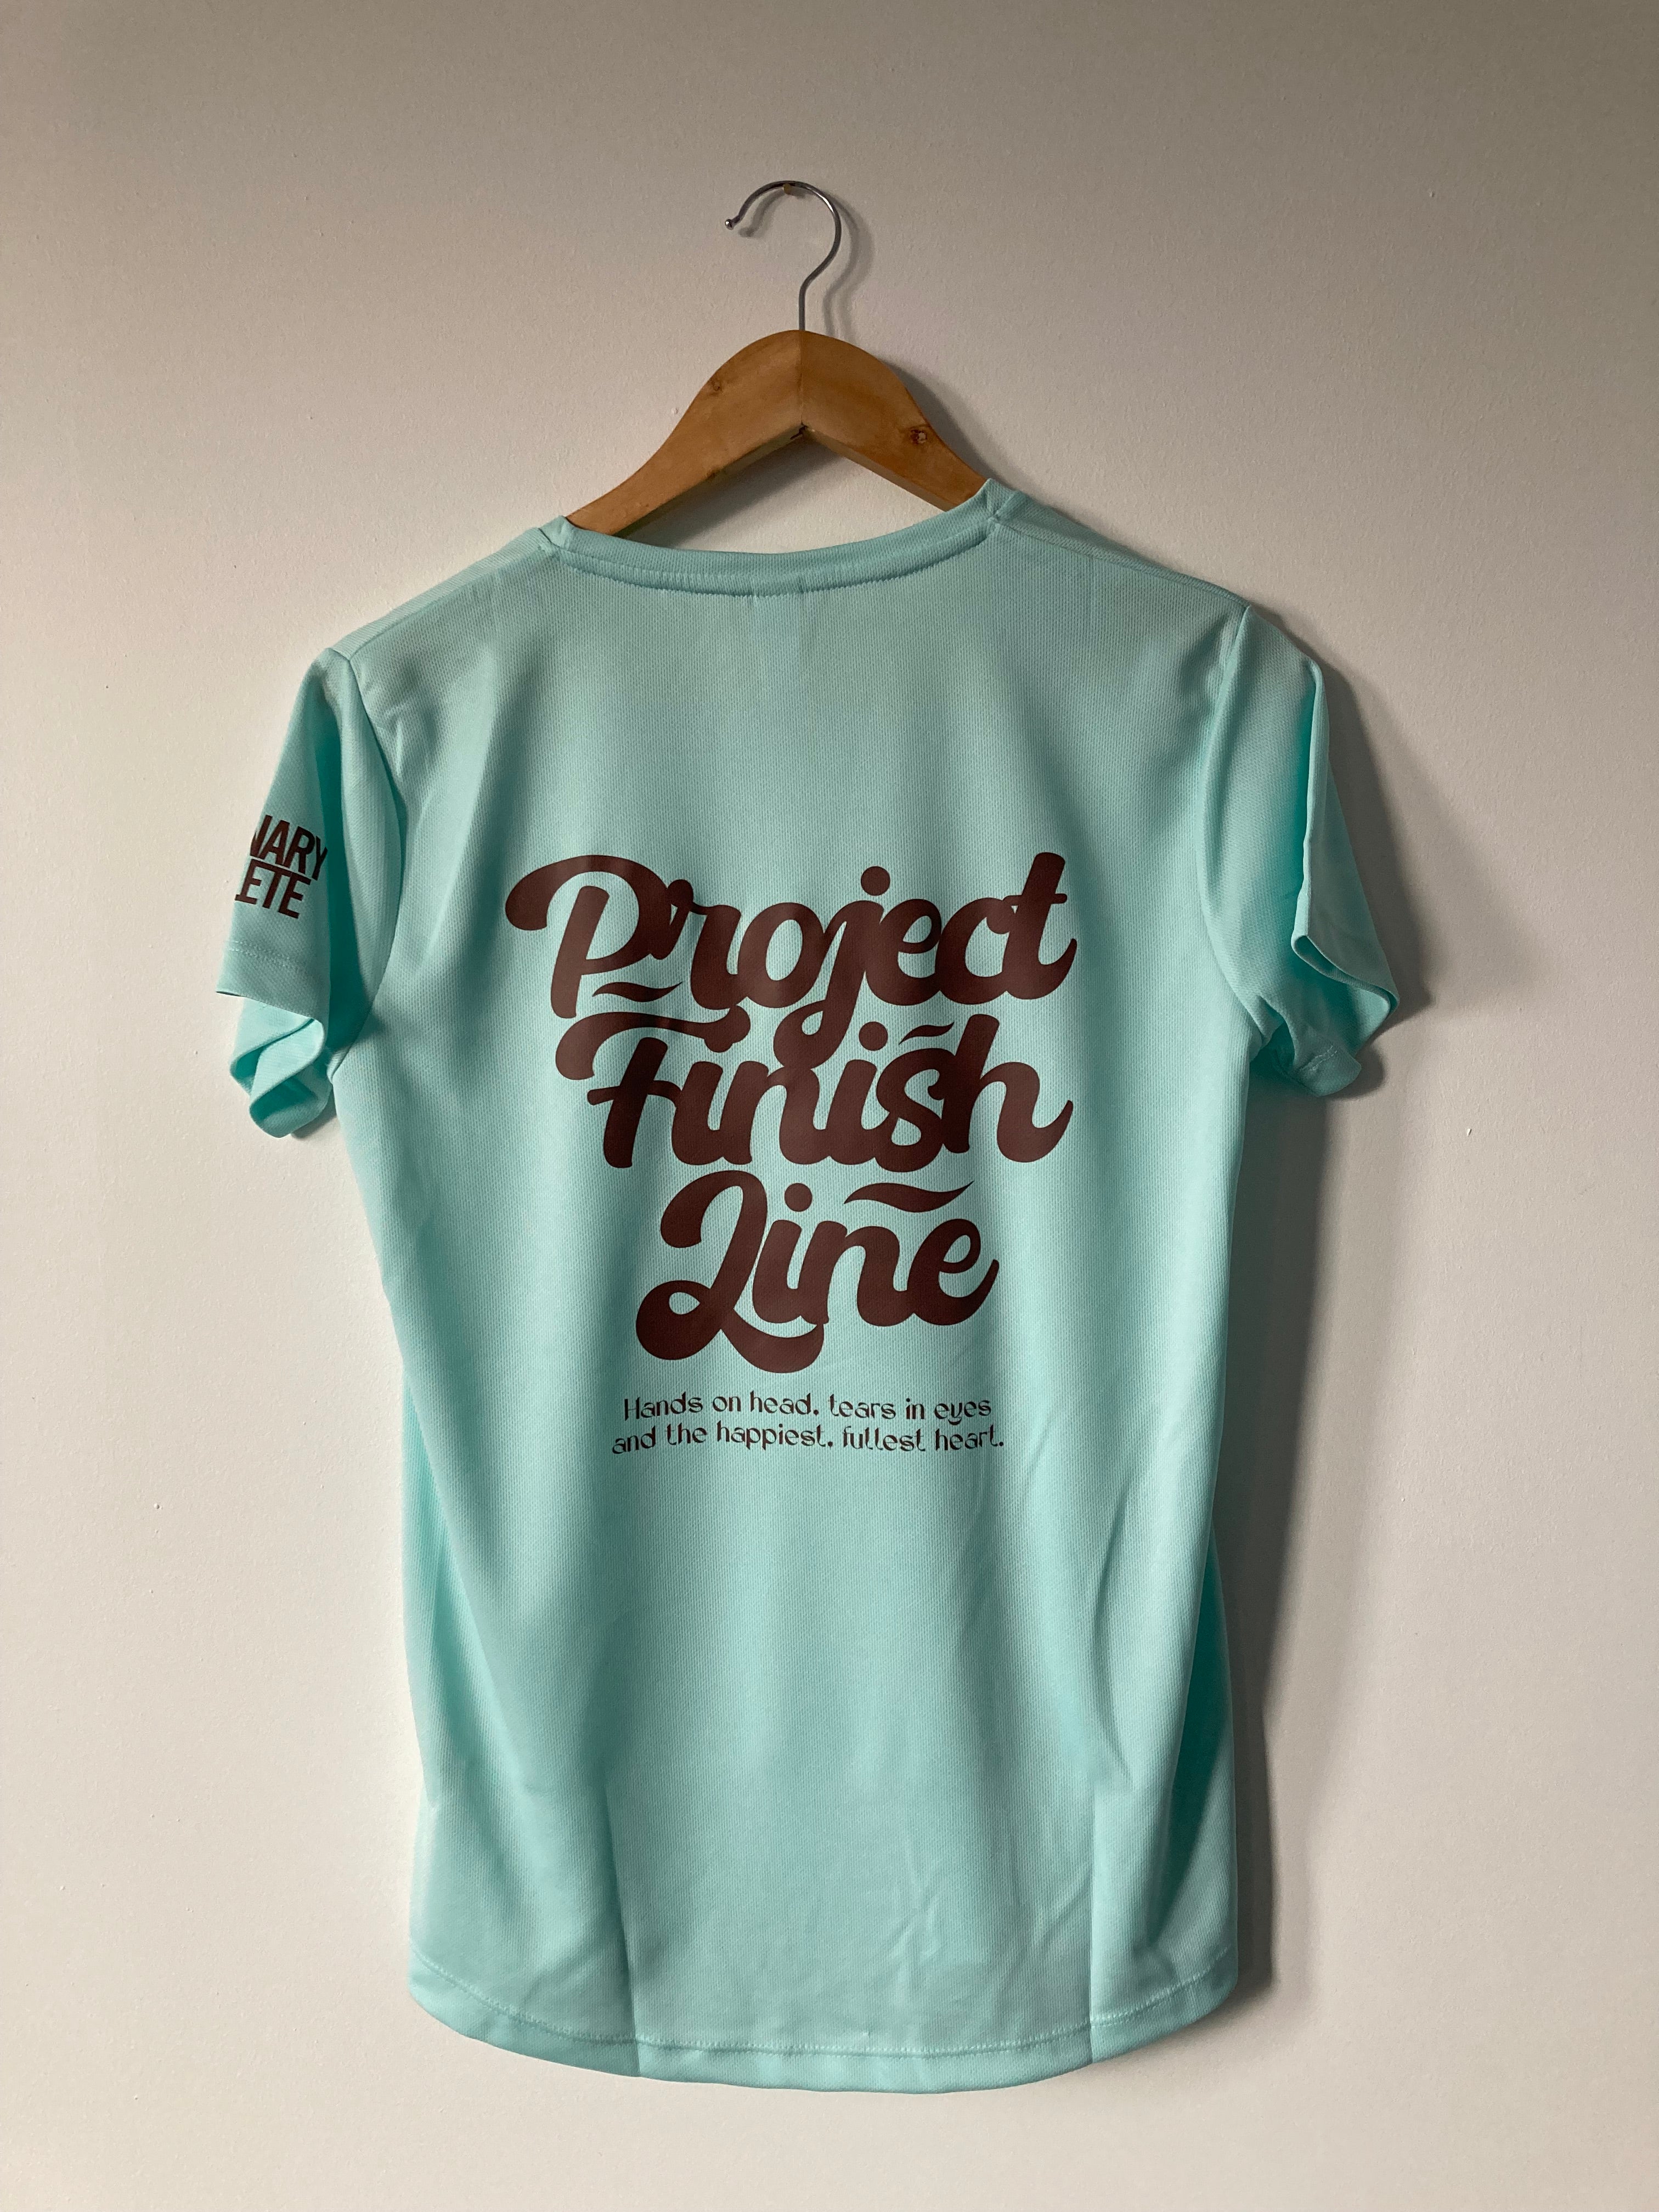 NEW! OA ‘Project Finish Line’  Tee